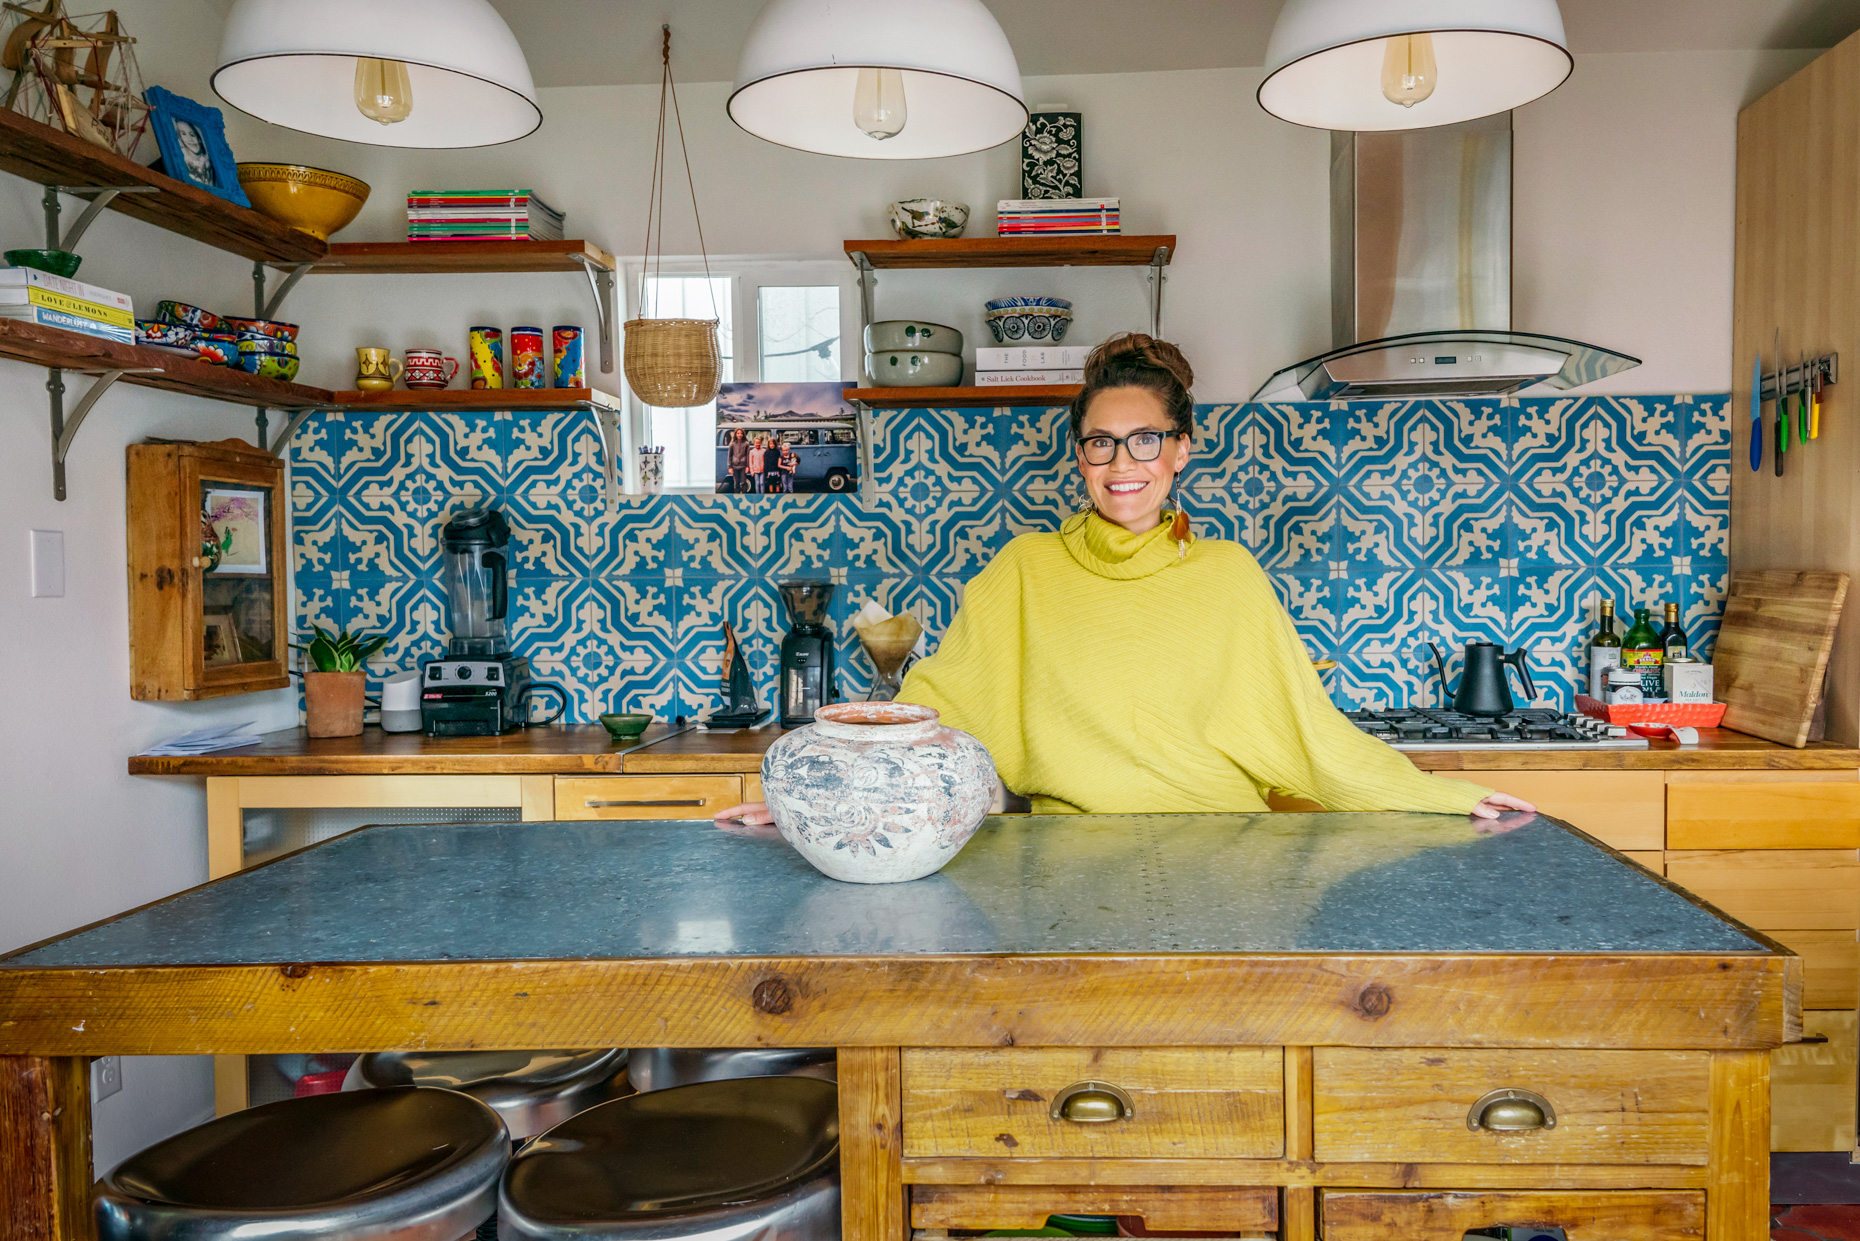 Smiling-women-in-yellow-sweater-standing-at-kitchen-counter-is20190306_Erinn_Sukha_0010